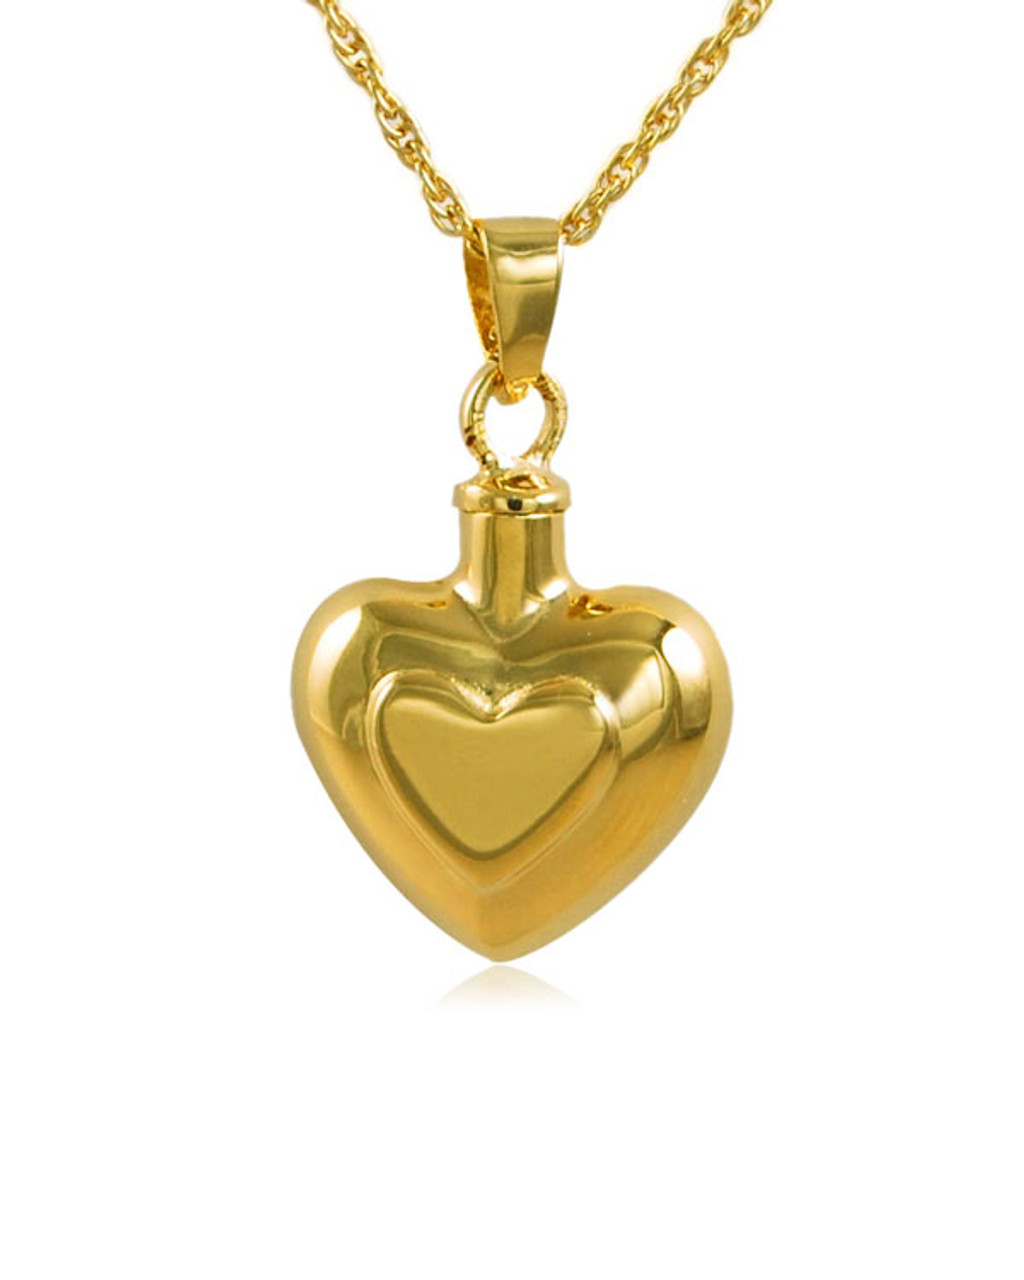 Black Hills Gold Heart Pendant with Double Hearts - G L03101